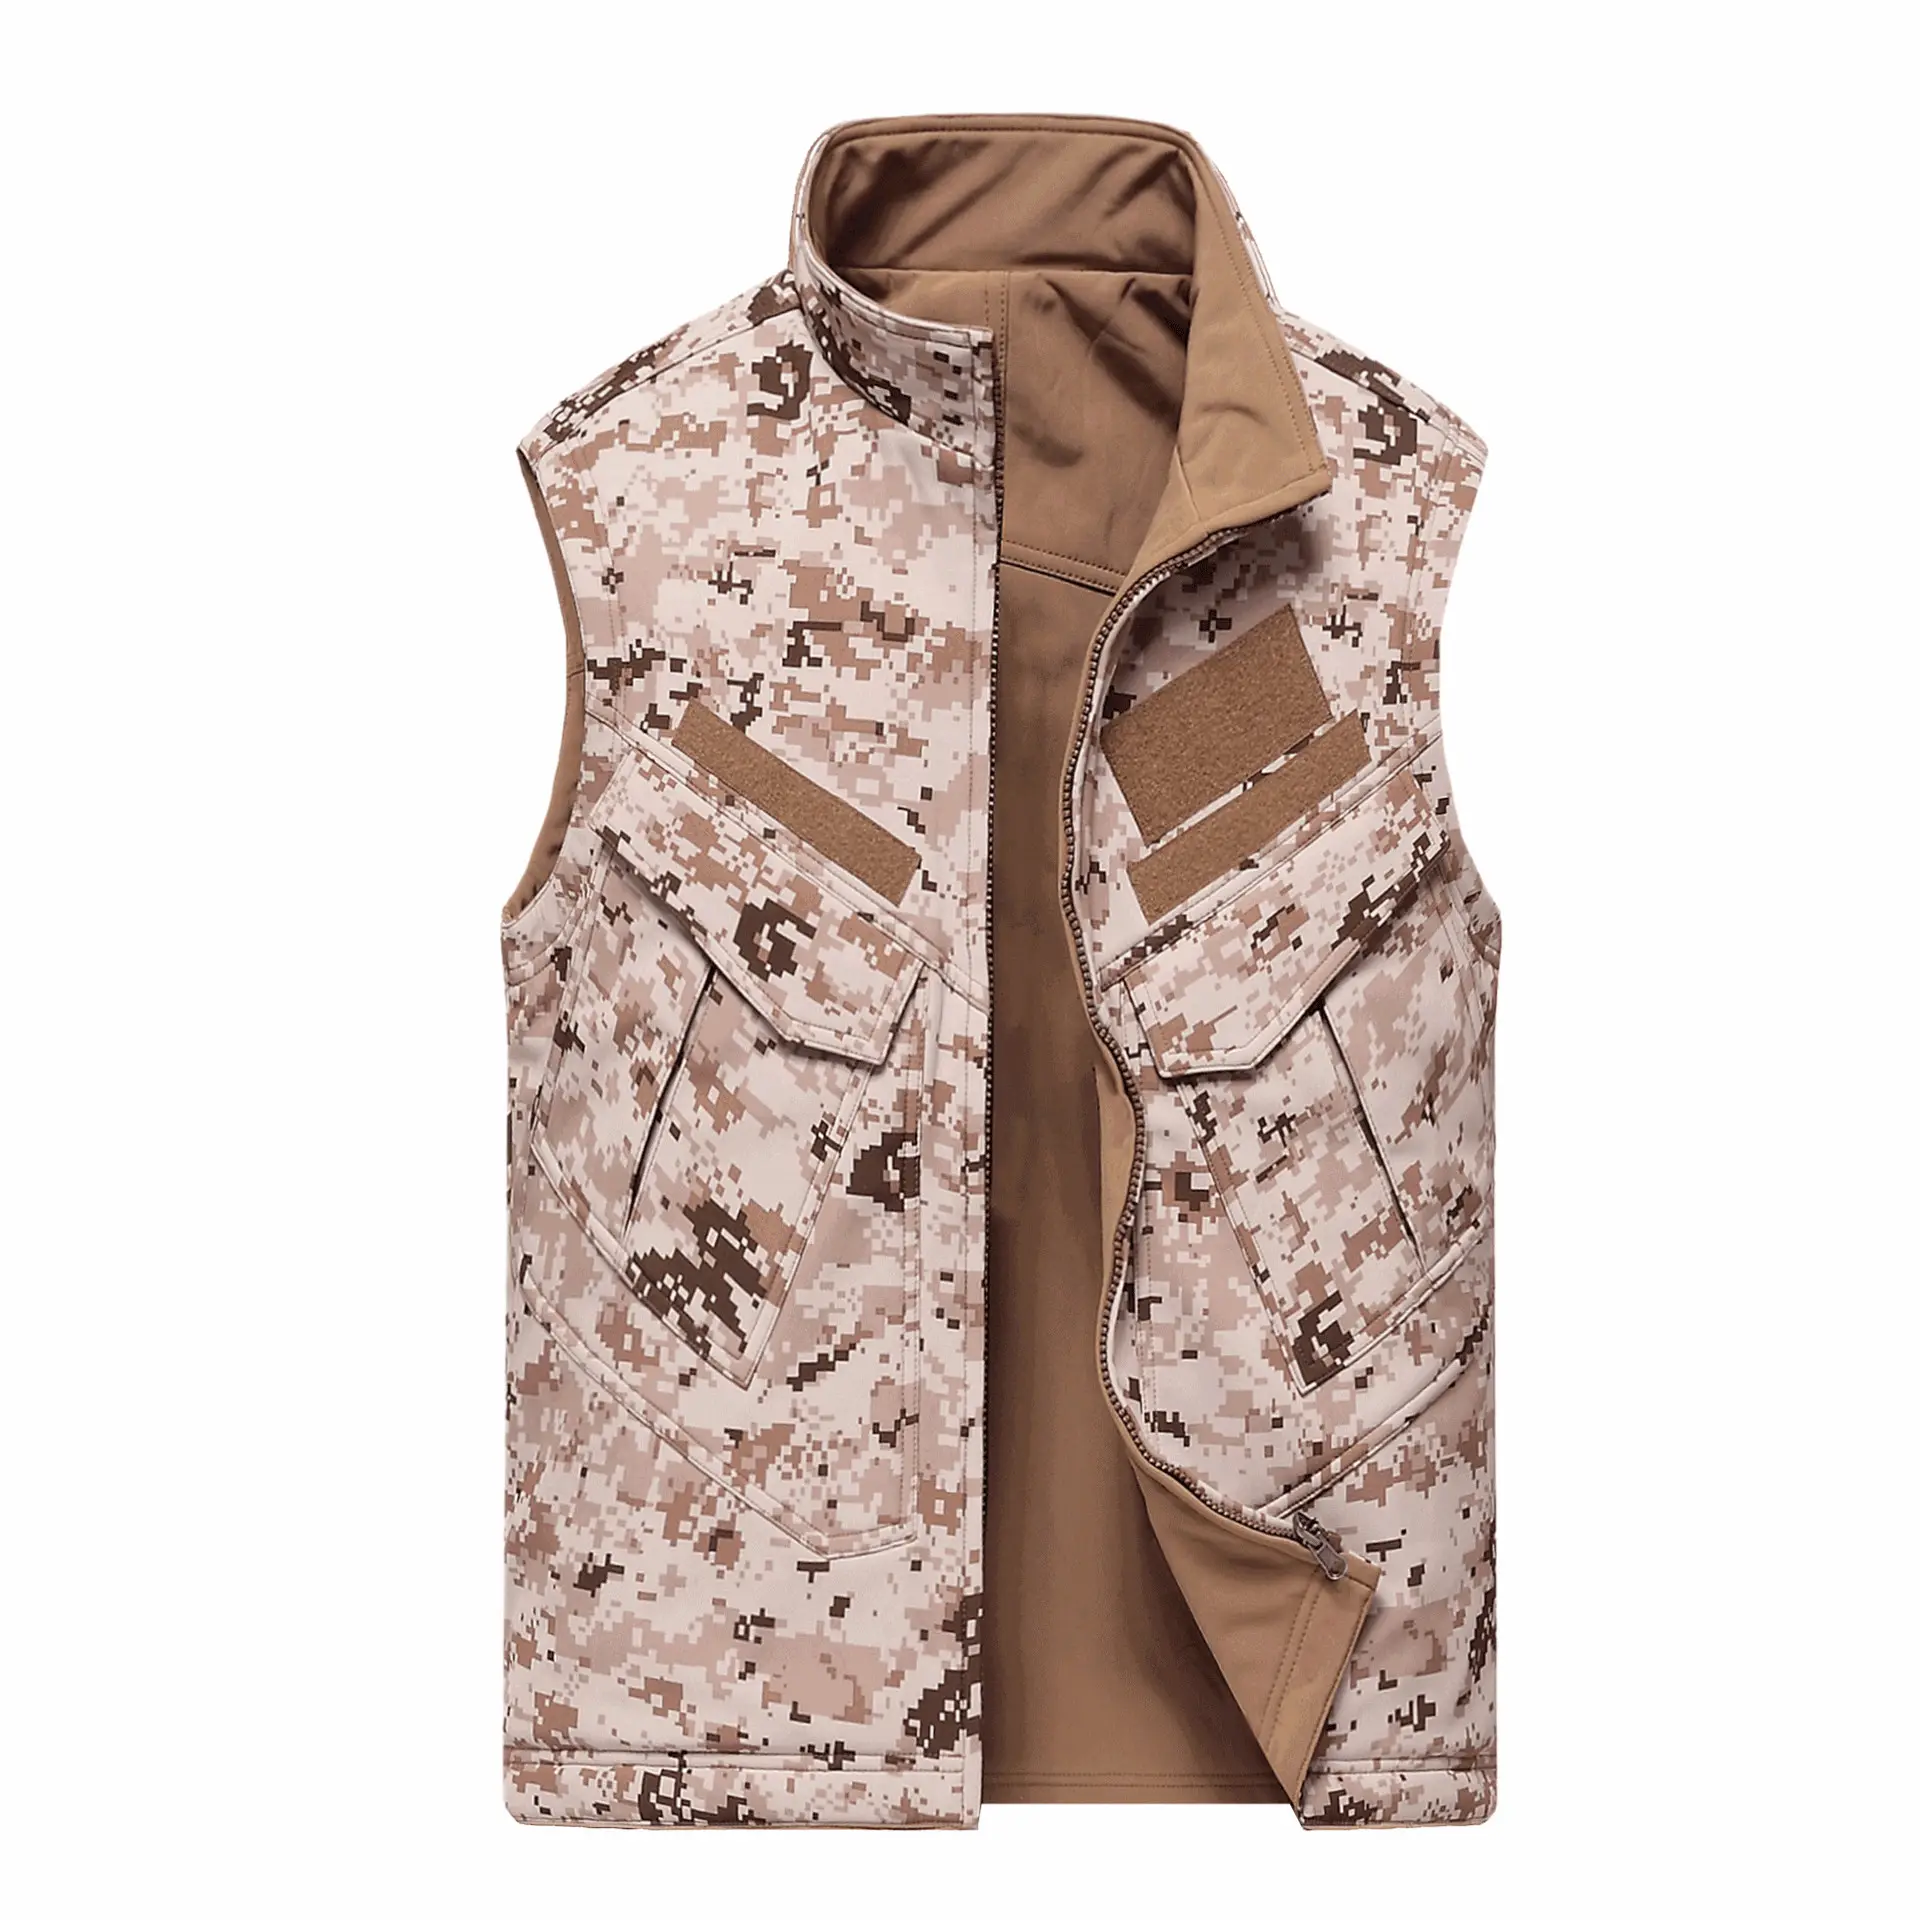 Double-sided Vests Shark Skin Soft Shell Camouflage Sleeveless Jackets Warmth Tactical Men's Vest Italy Windbreaker Unisex